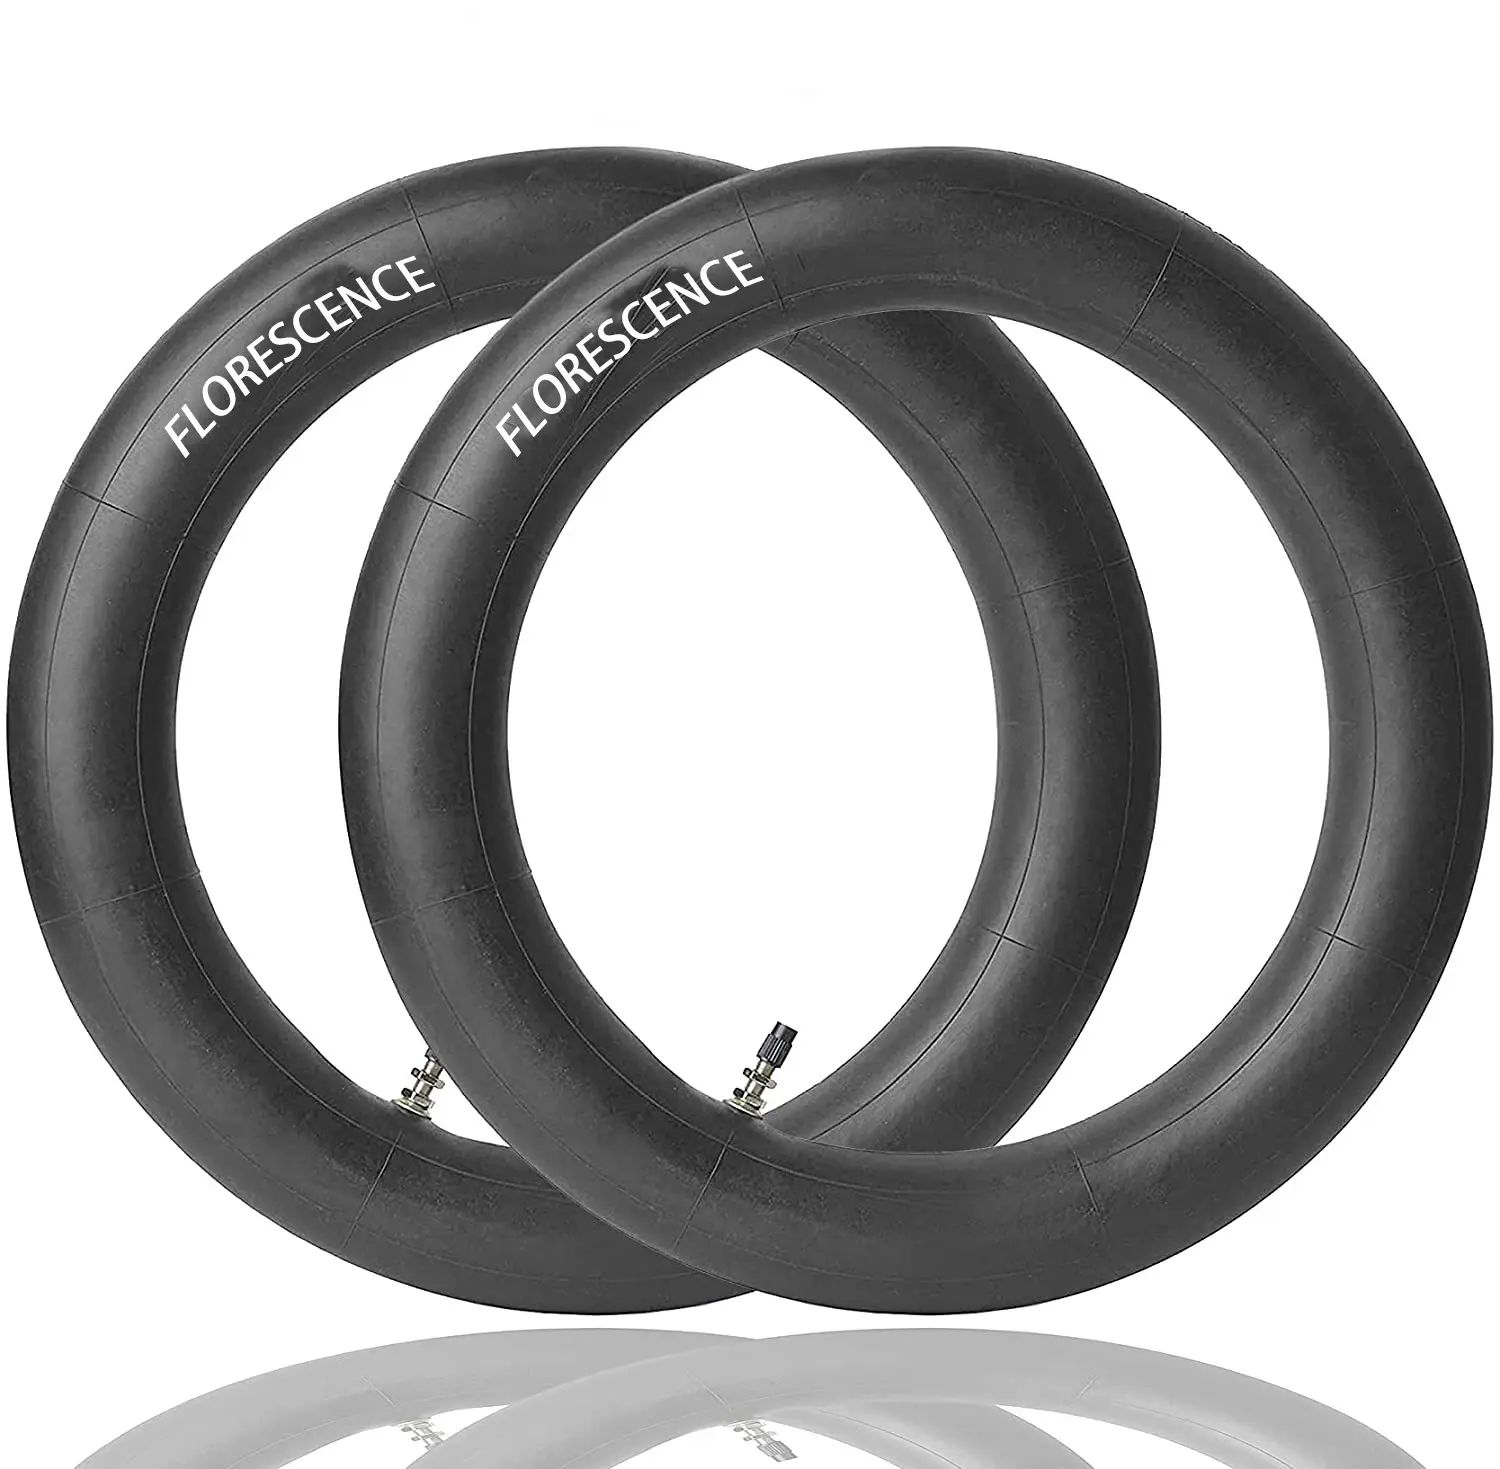 Good Quality Natural Rubber 3.00-18 Motorcycle Inner Tube 90/90-18 Motorcycle Tube